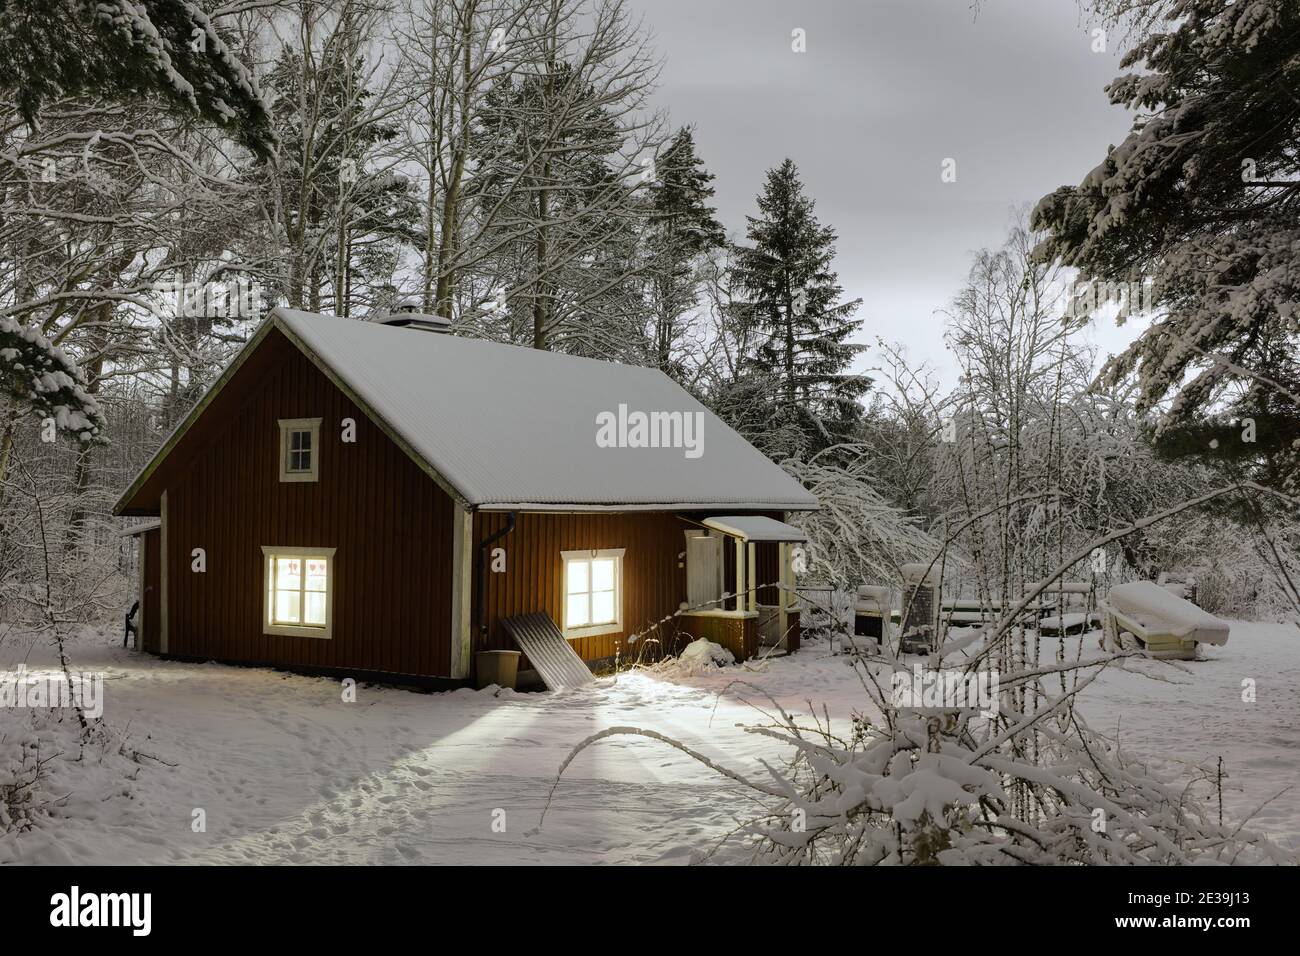 Askrike Golf Club house outside Vaxholm, Sweden, during a winter night Stock Photo